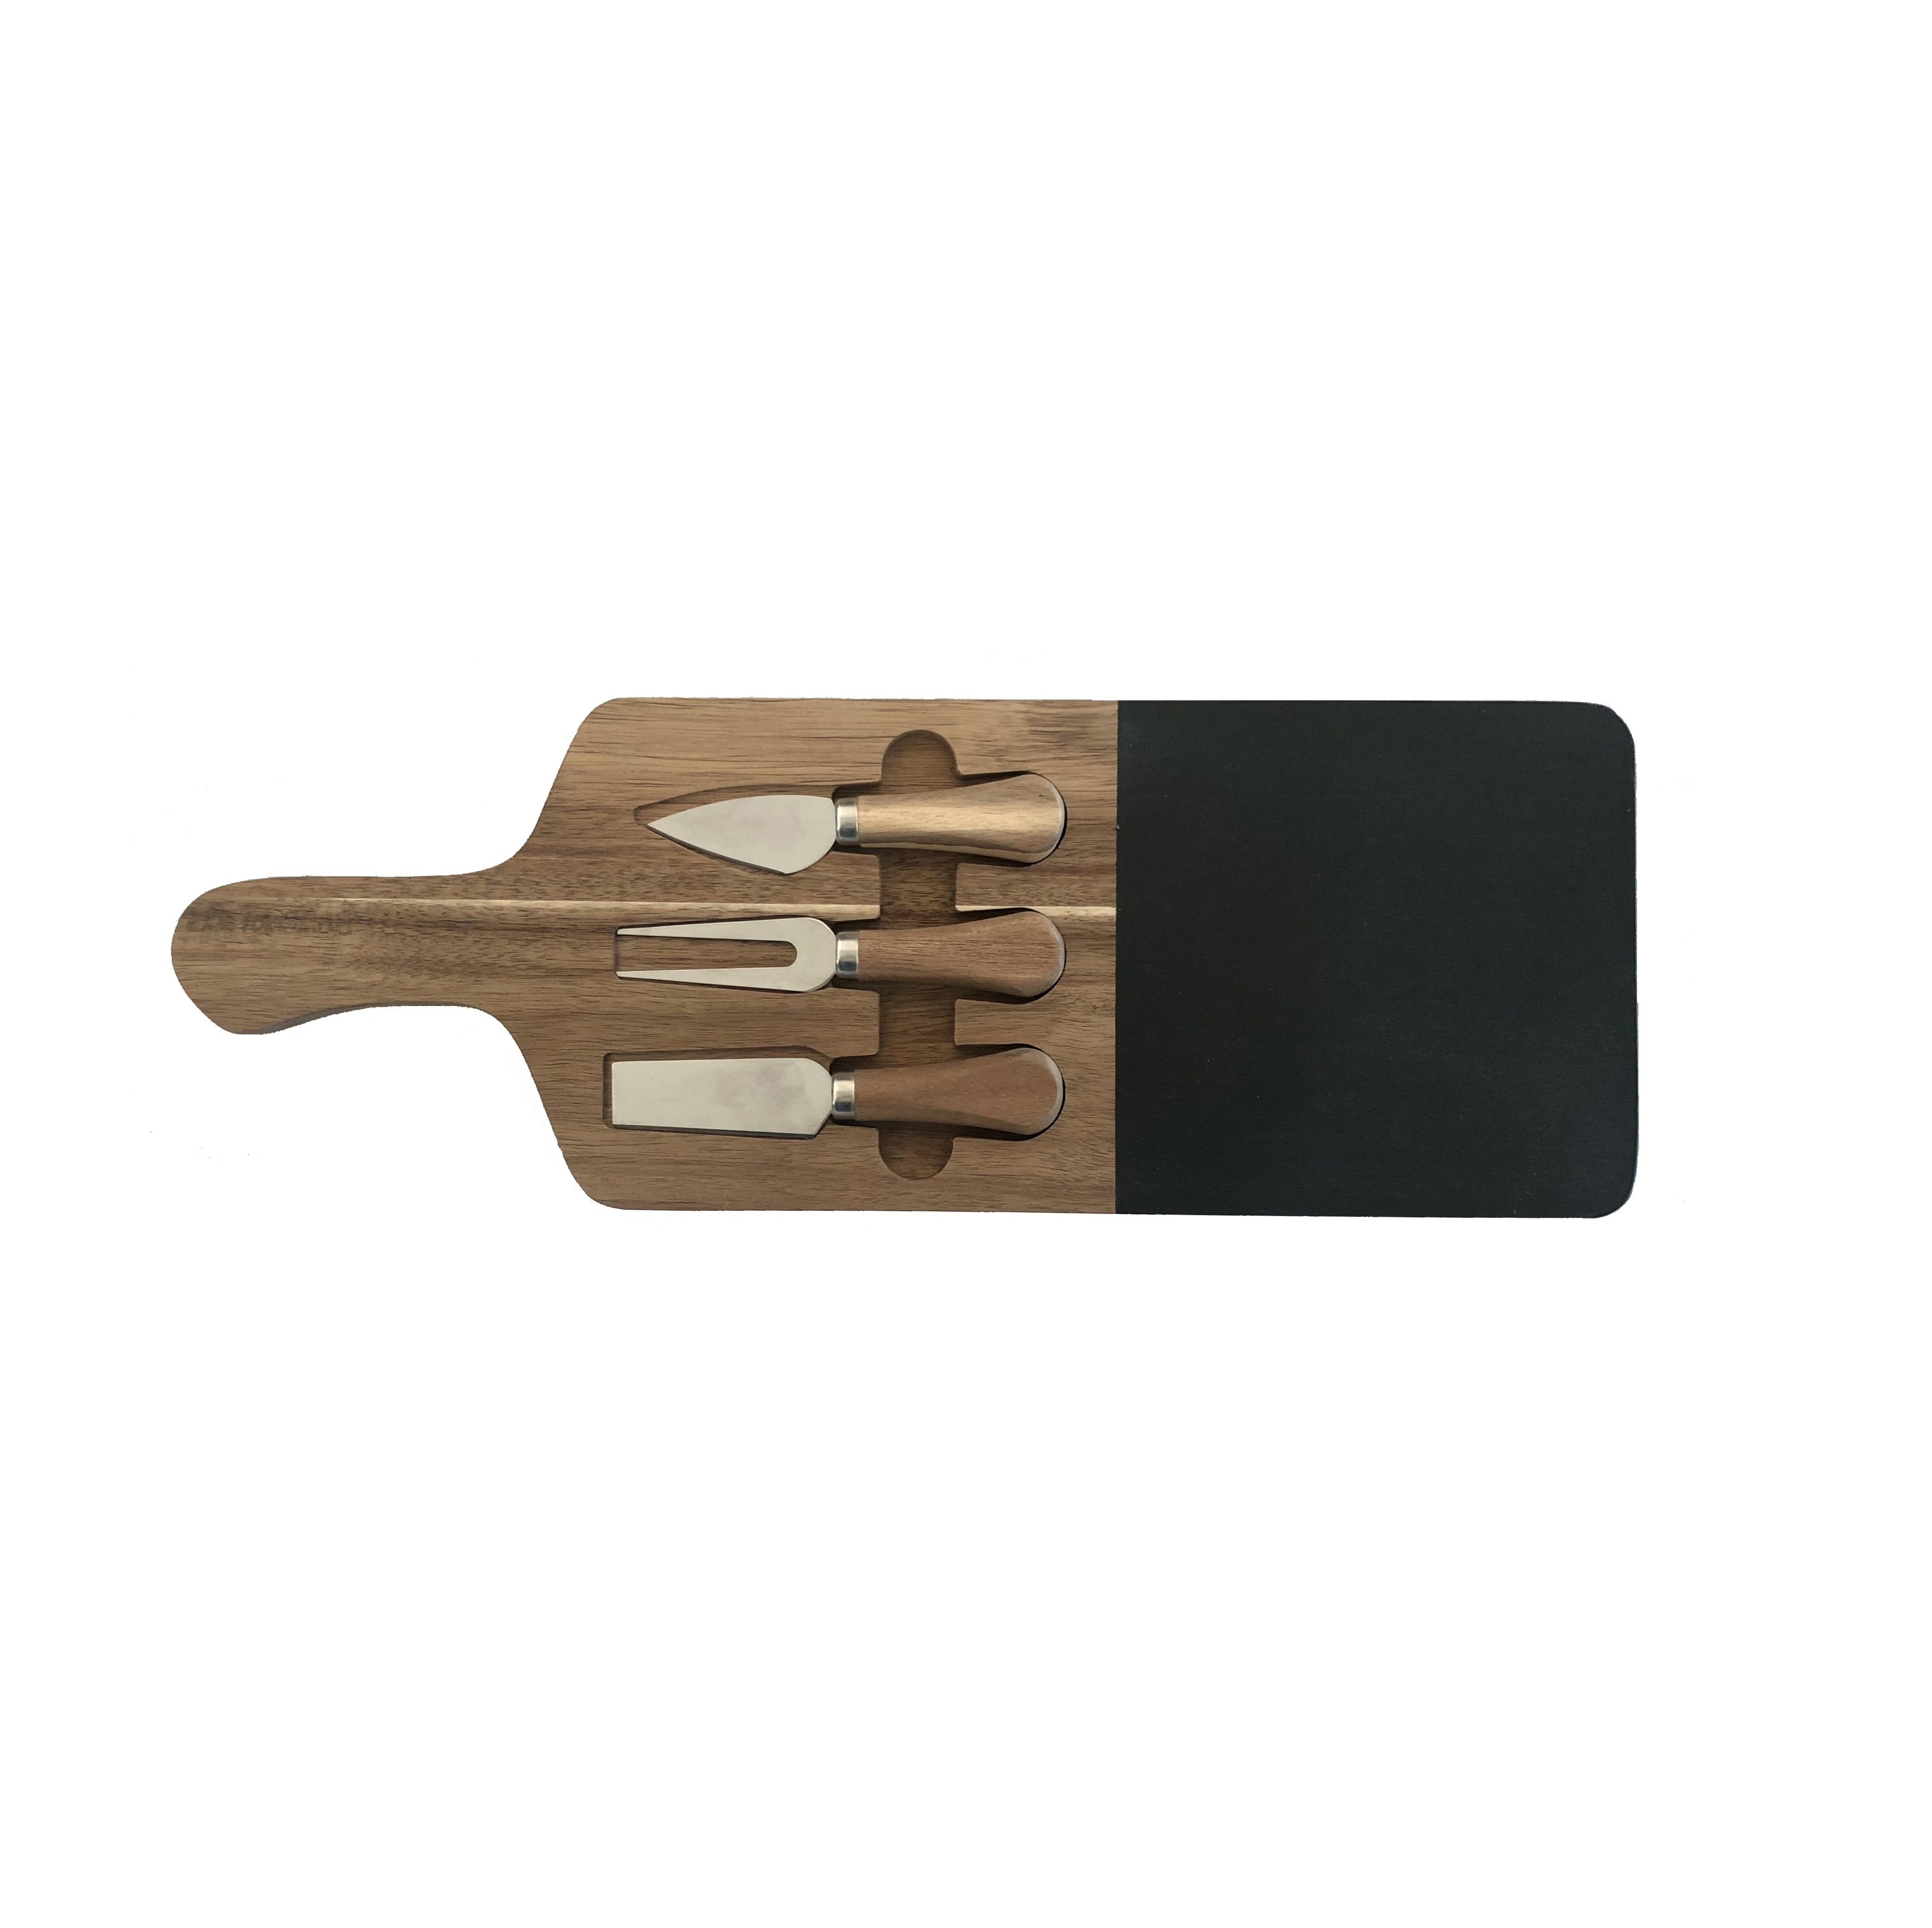 Handmade Customized Wooden Natural Black Stone Food Serving Plate with Cutting Knife Set Featured Image